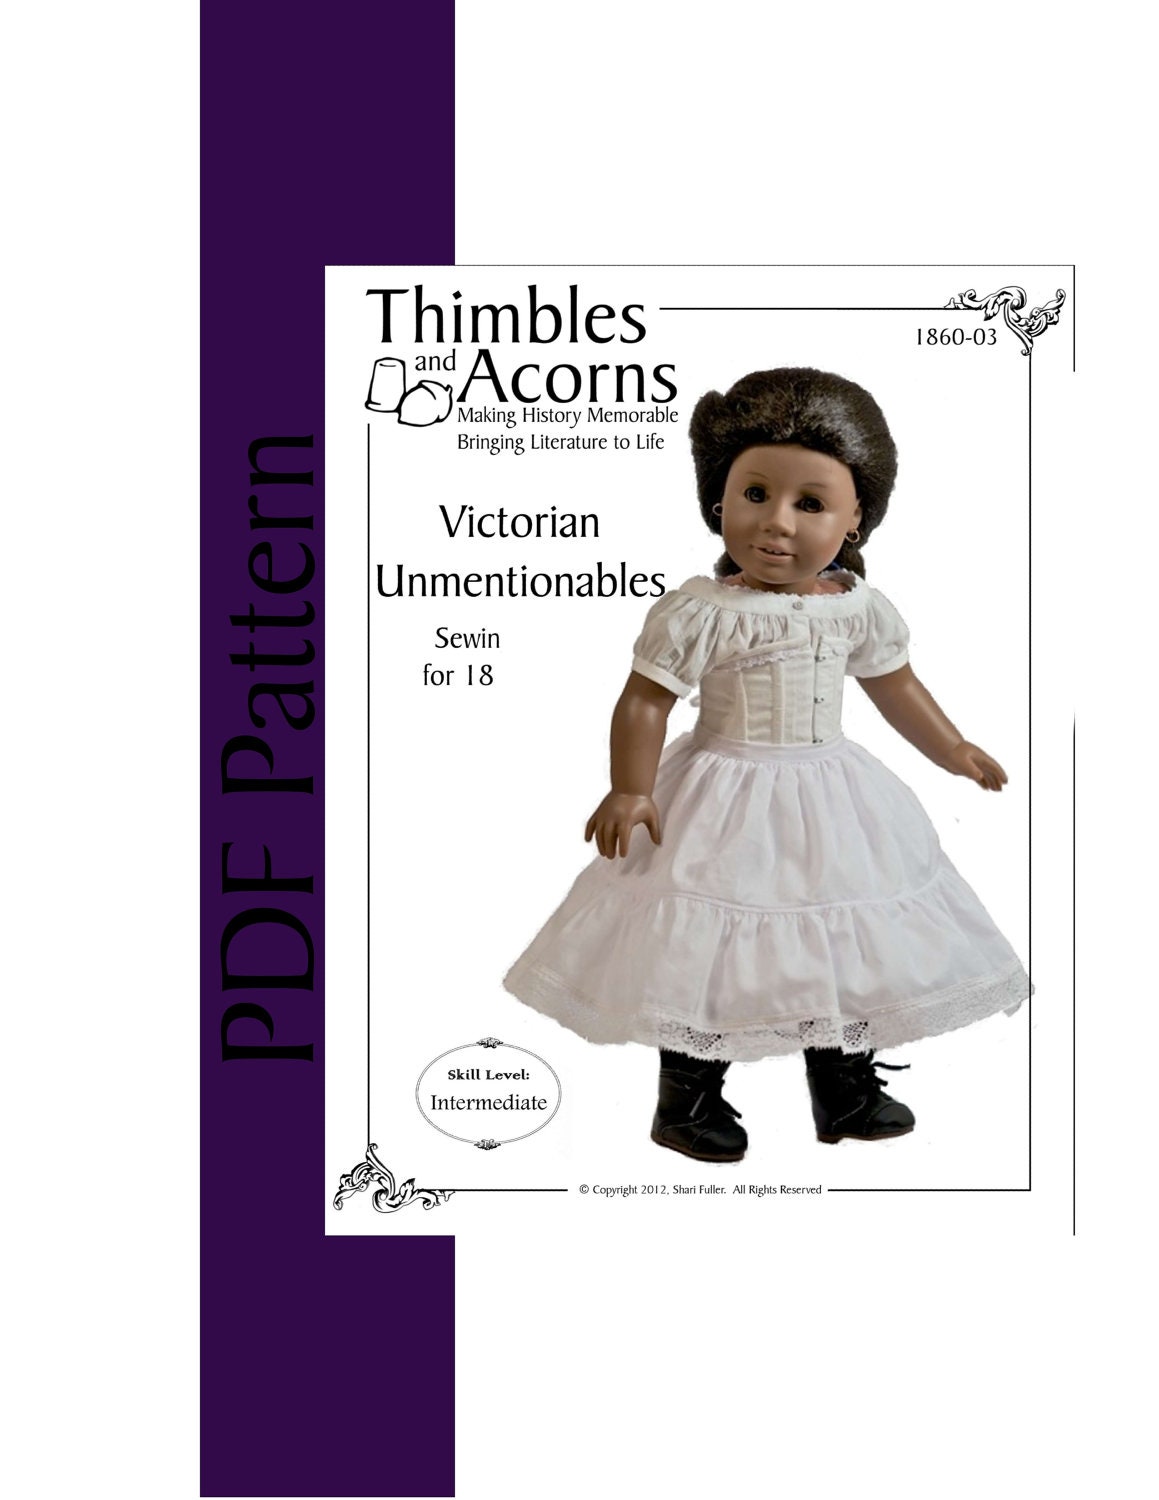 PDF Pattern for Victorian Unmentionables Set  for 18 inch American Girl Doll, by Thimbles and Acorns